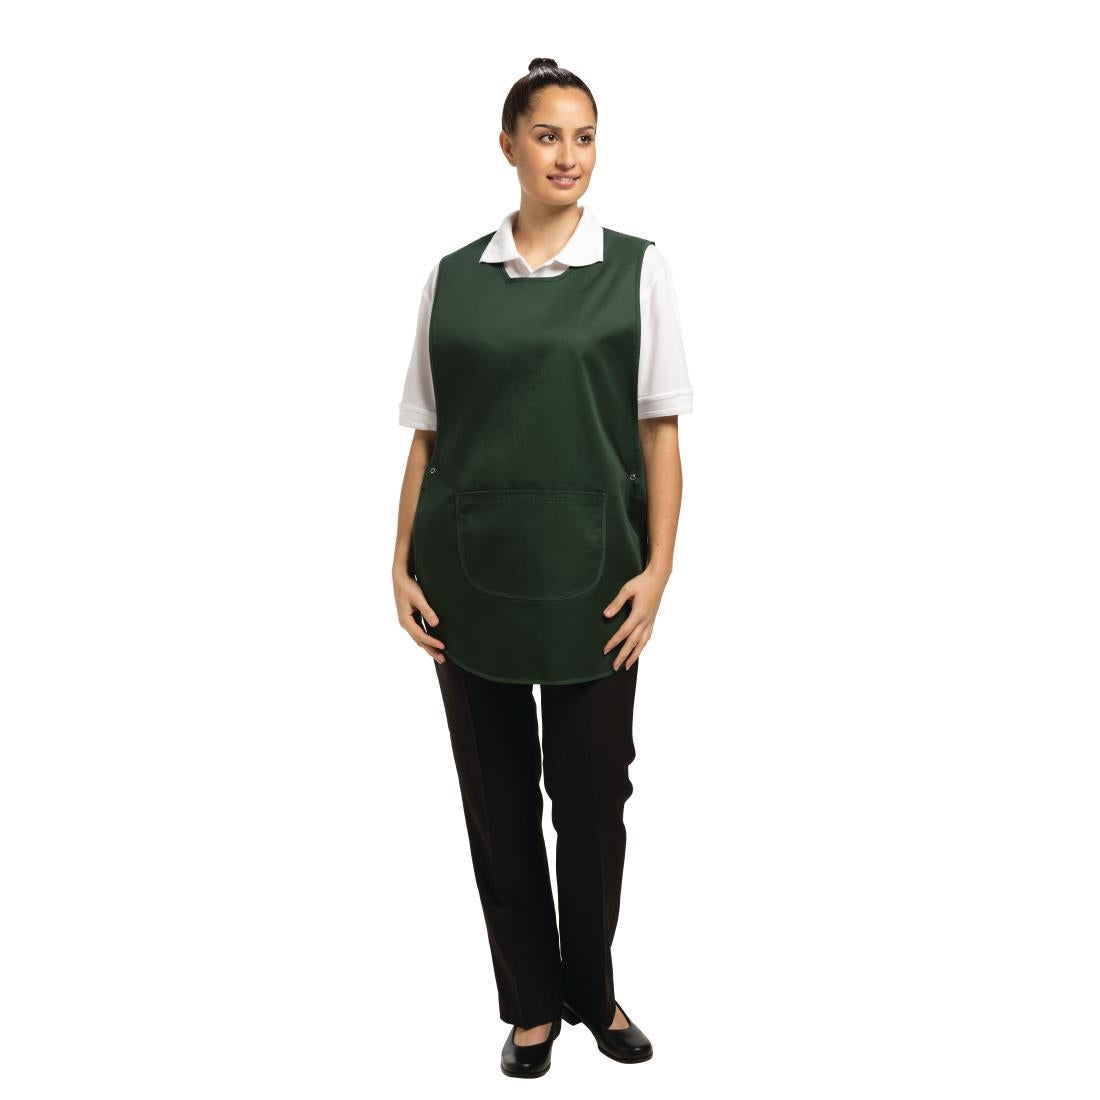 B041 Whites Tabard With Pocket Green JD Catering Equipment Solutions Ltd